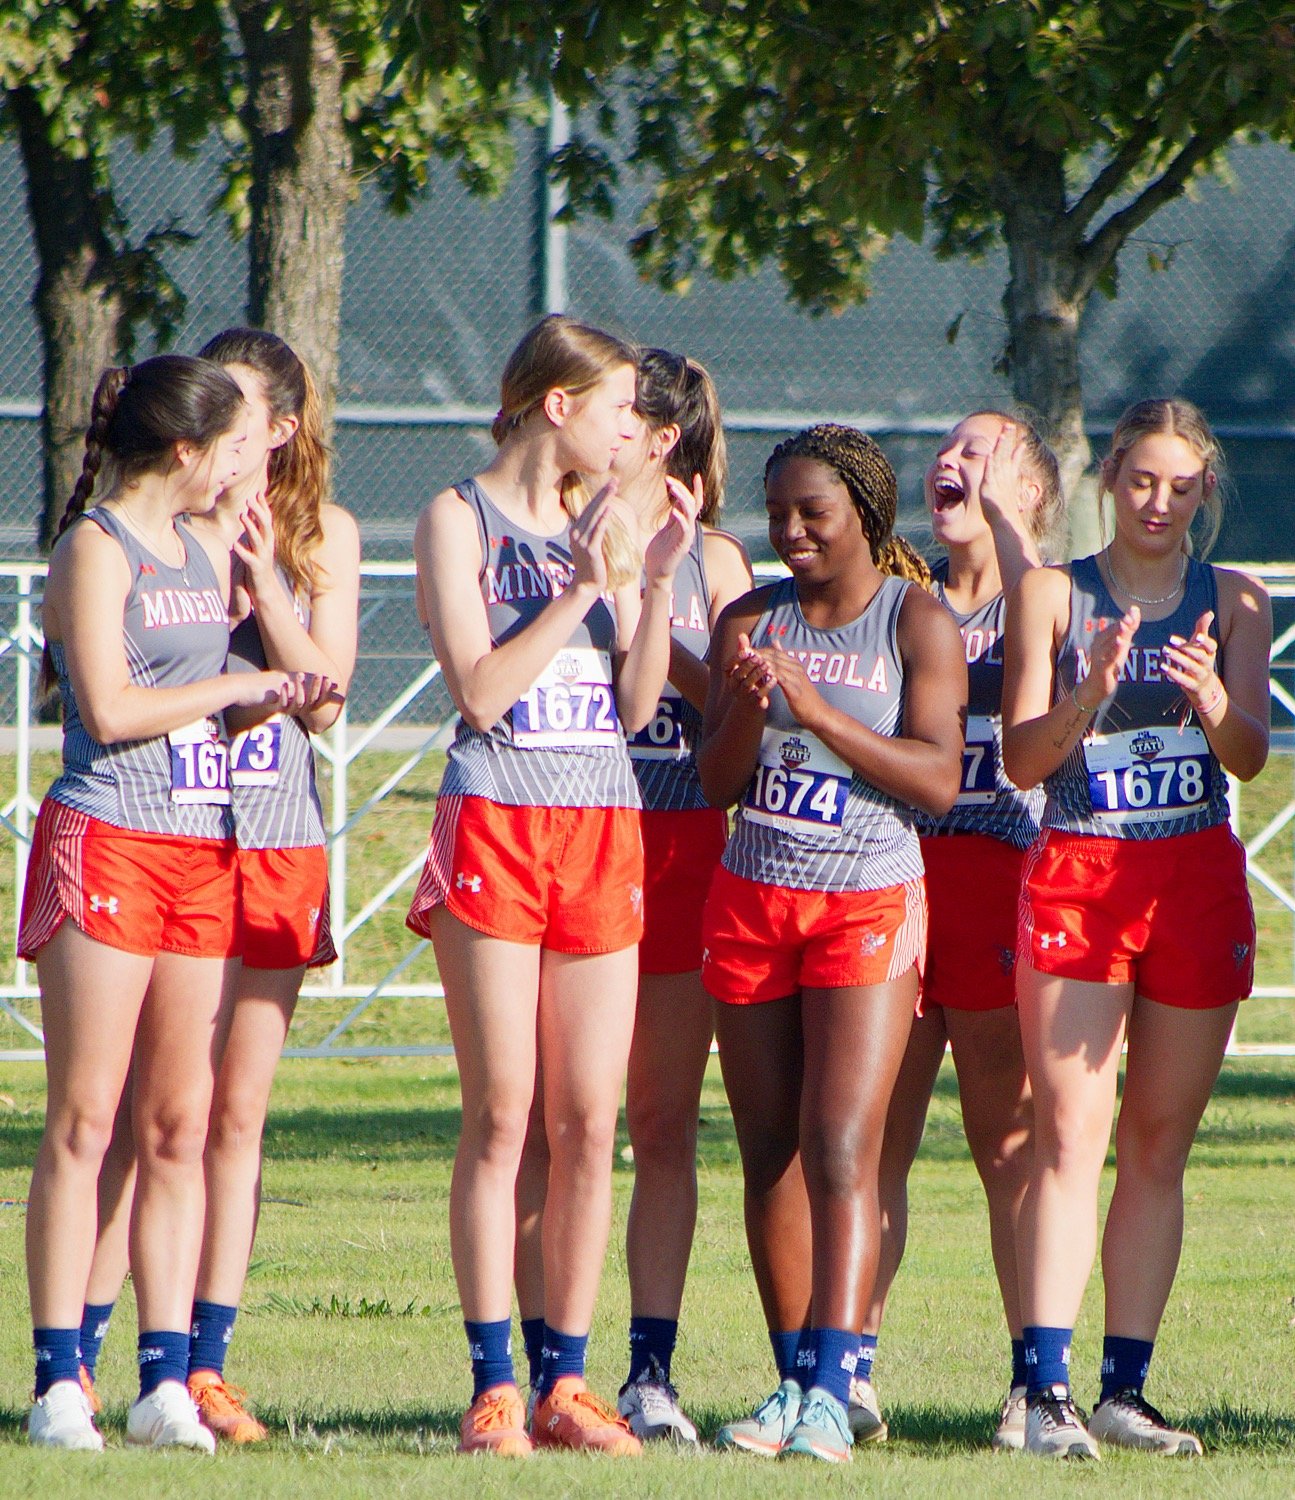 A few moments before the 2021 UIL state cross country began Nov. 5, all participants were asked to give themselves a round of applause for making it to the competition. Kapri Riley, Raquel Hughes, Olivia Hughes, Keilee Riley, Shylah Kratzmeyer, Riley Weekly and Hannah Zoch did just that. [see more sports from throughout the year]